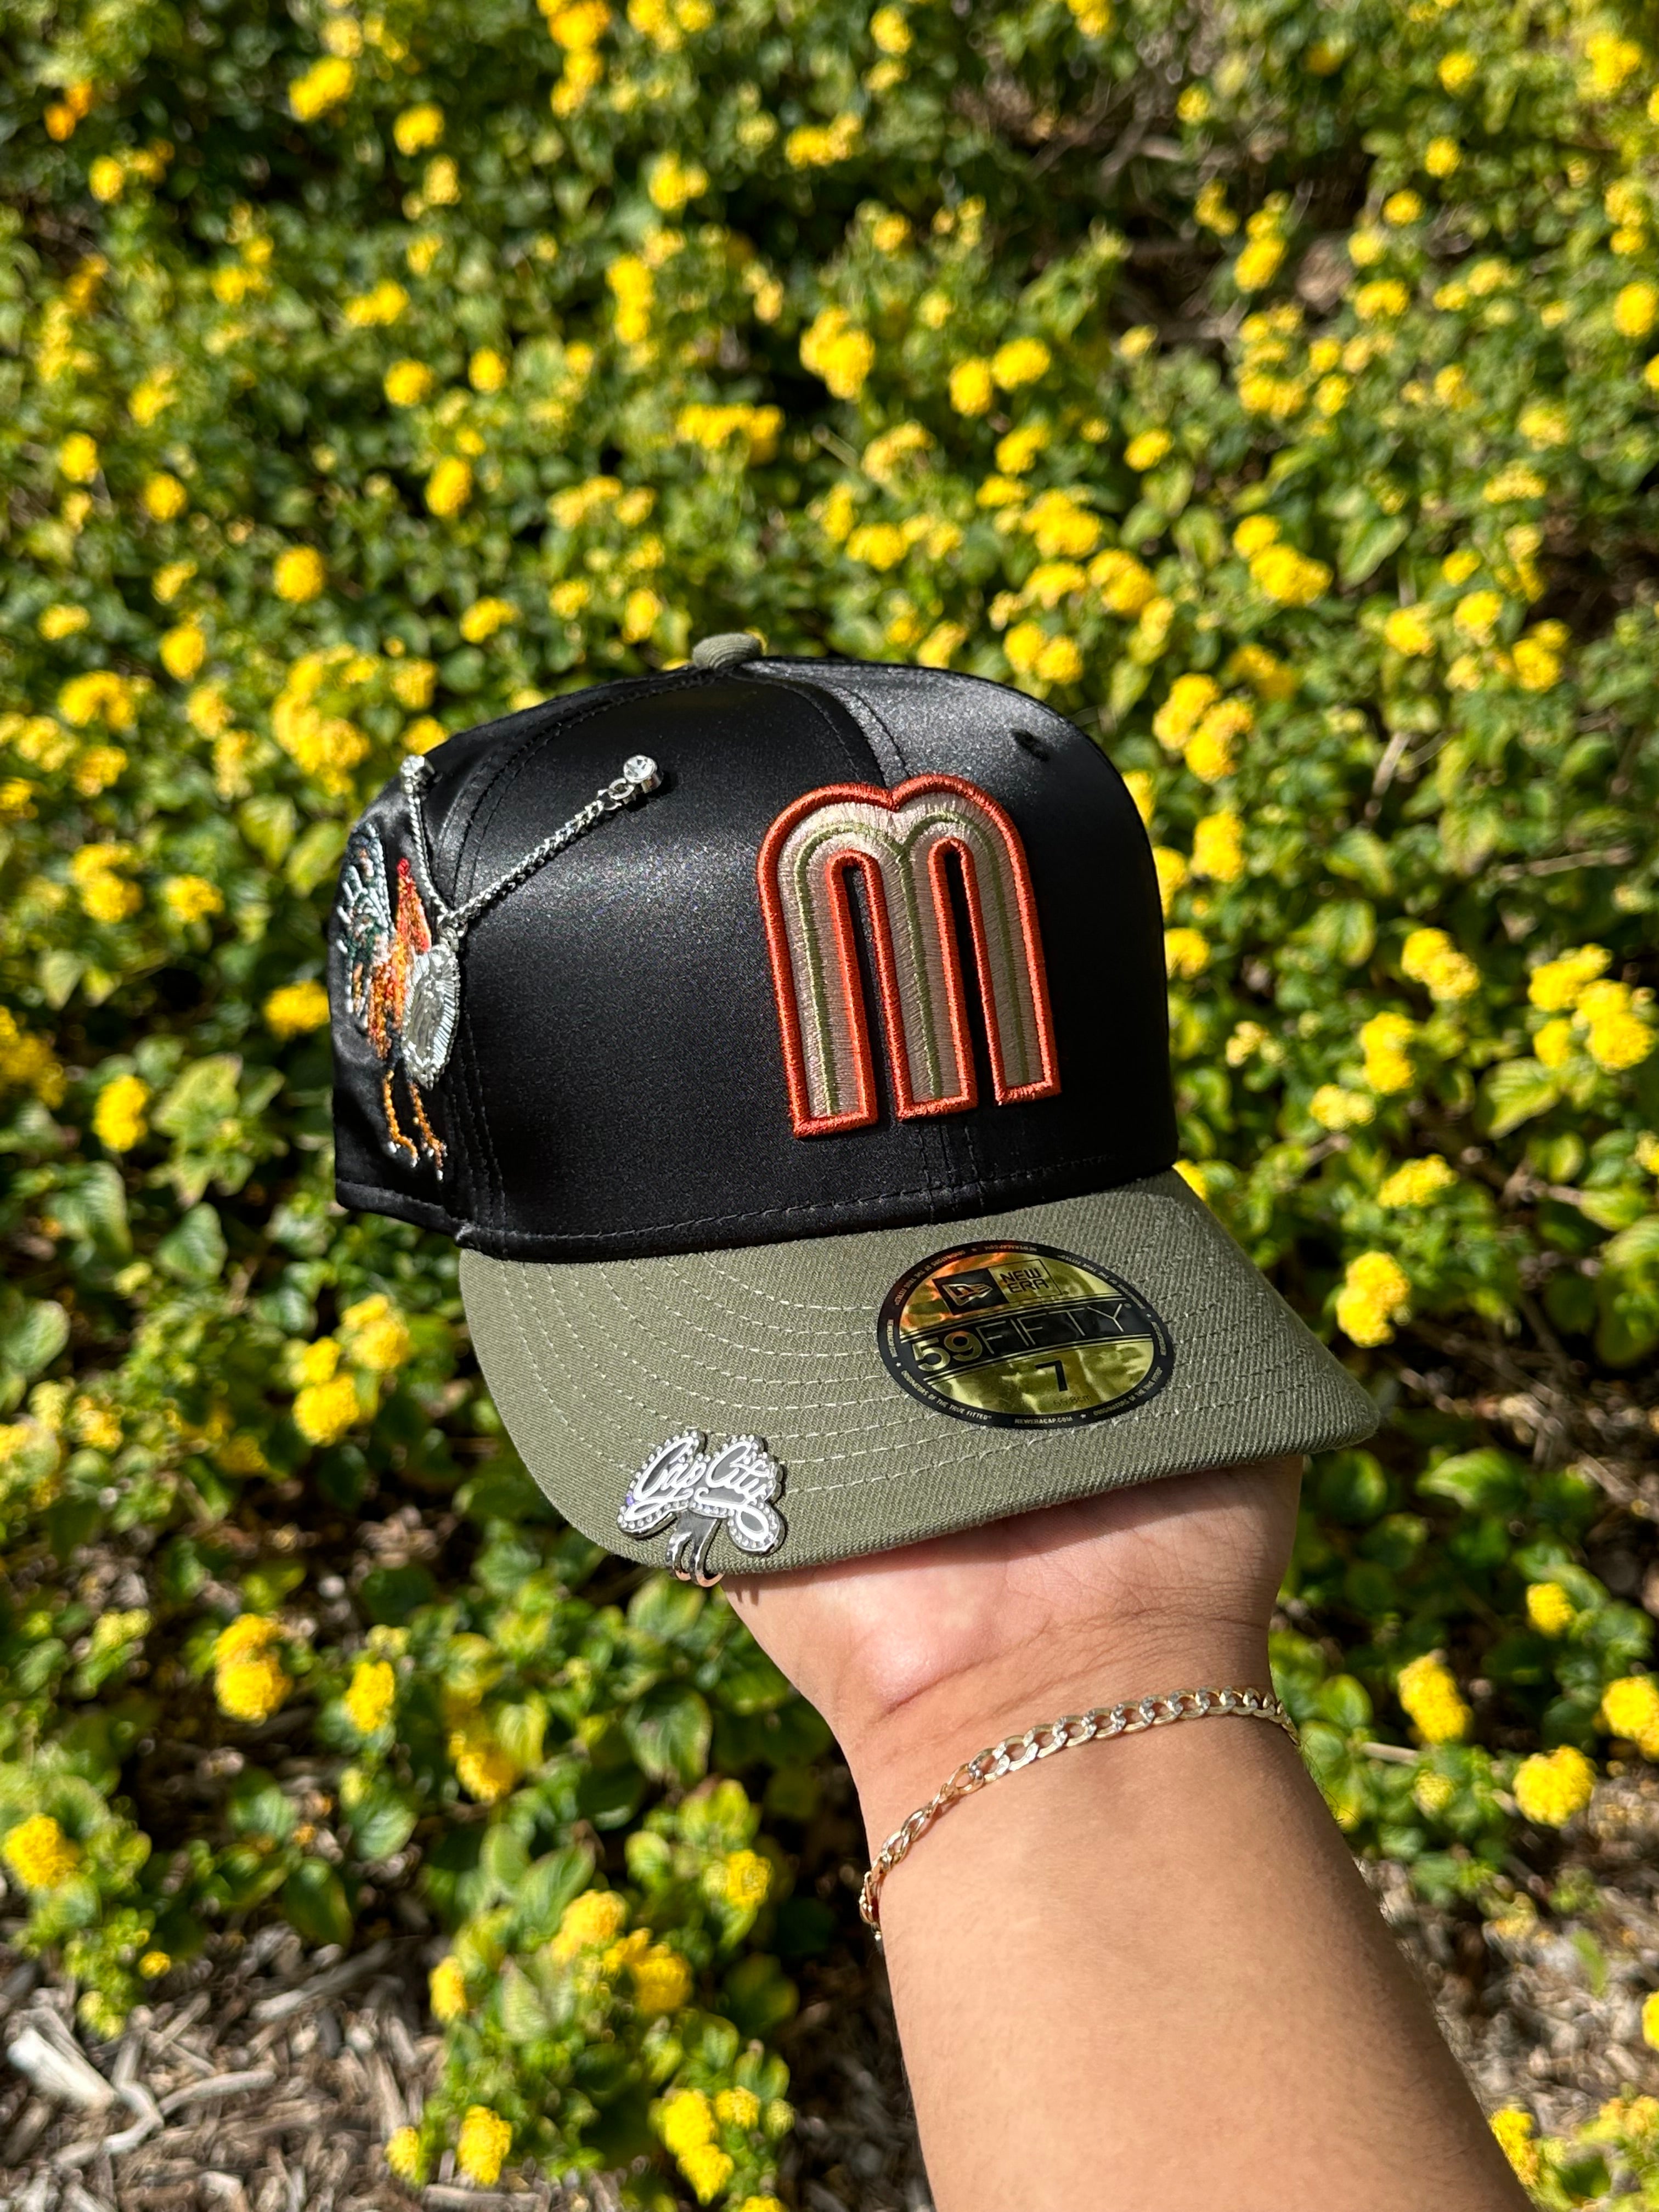 NEW ERA EXCLUSIVE 59FIFTY BLACK SATIN/OLIVE MEXICO TWO TONE W/ "EL GALLO" SIDE PATCH + AZTEC PATCH